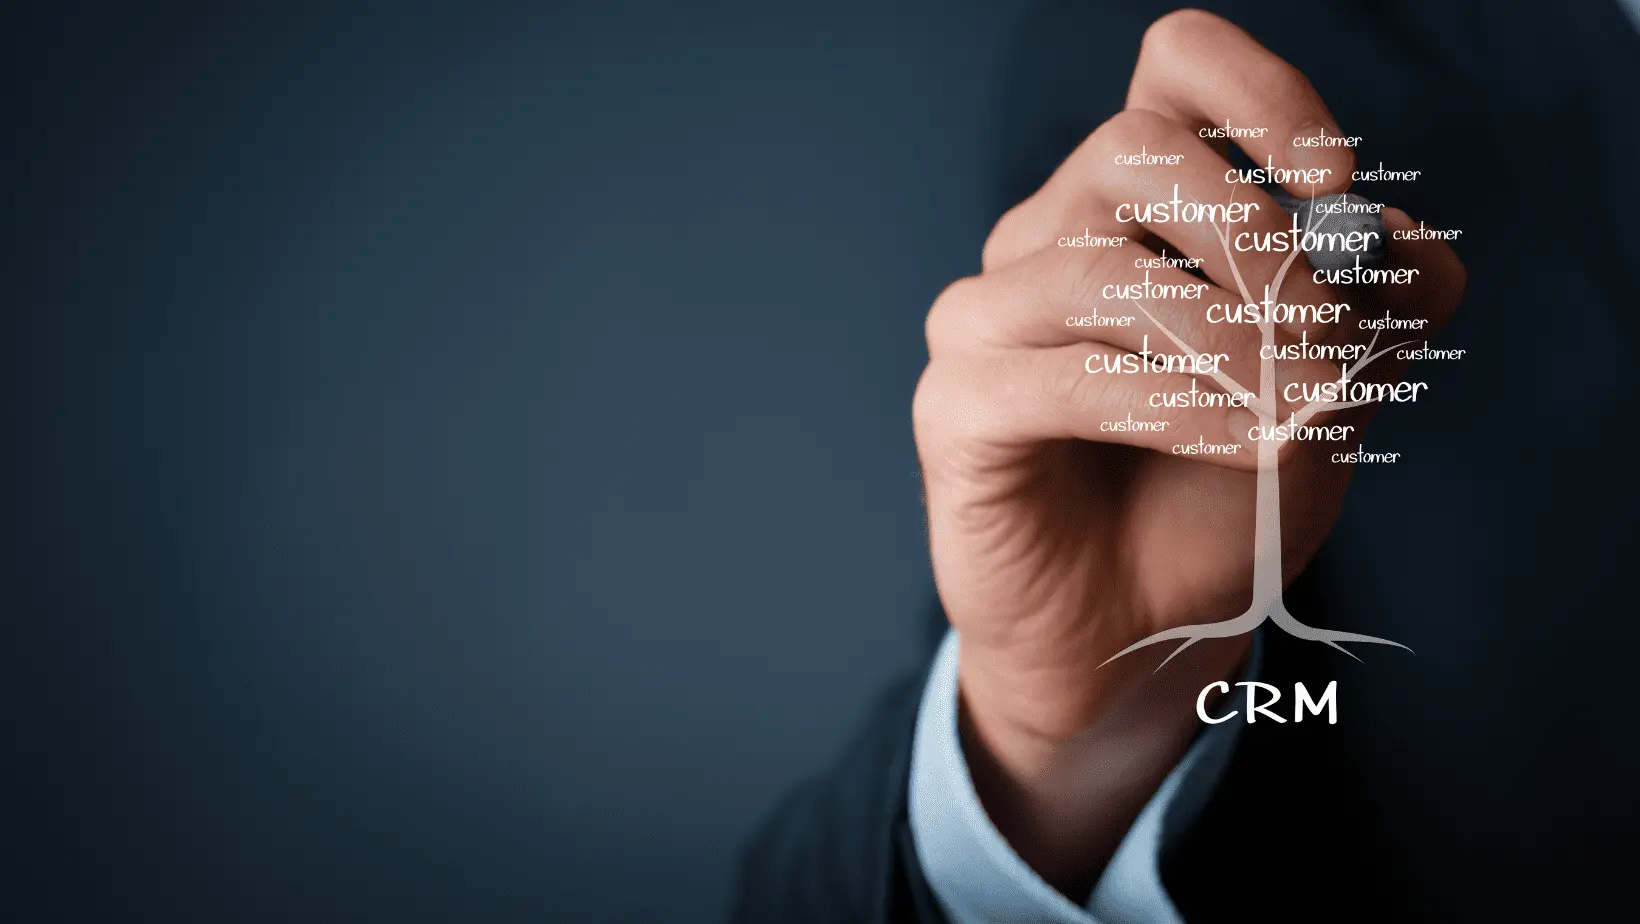 CRM development process, with developers collaborating on coding and designing CRM software.